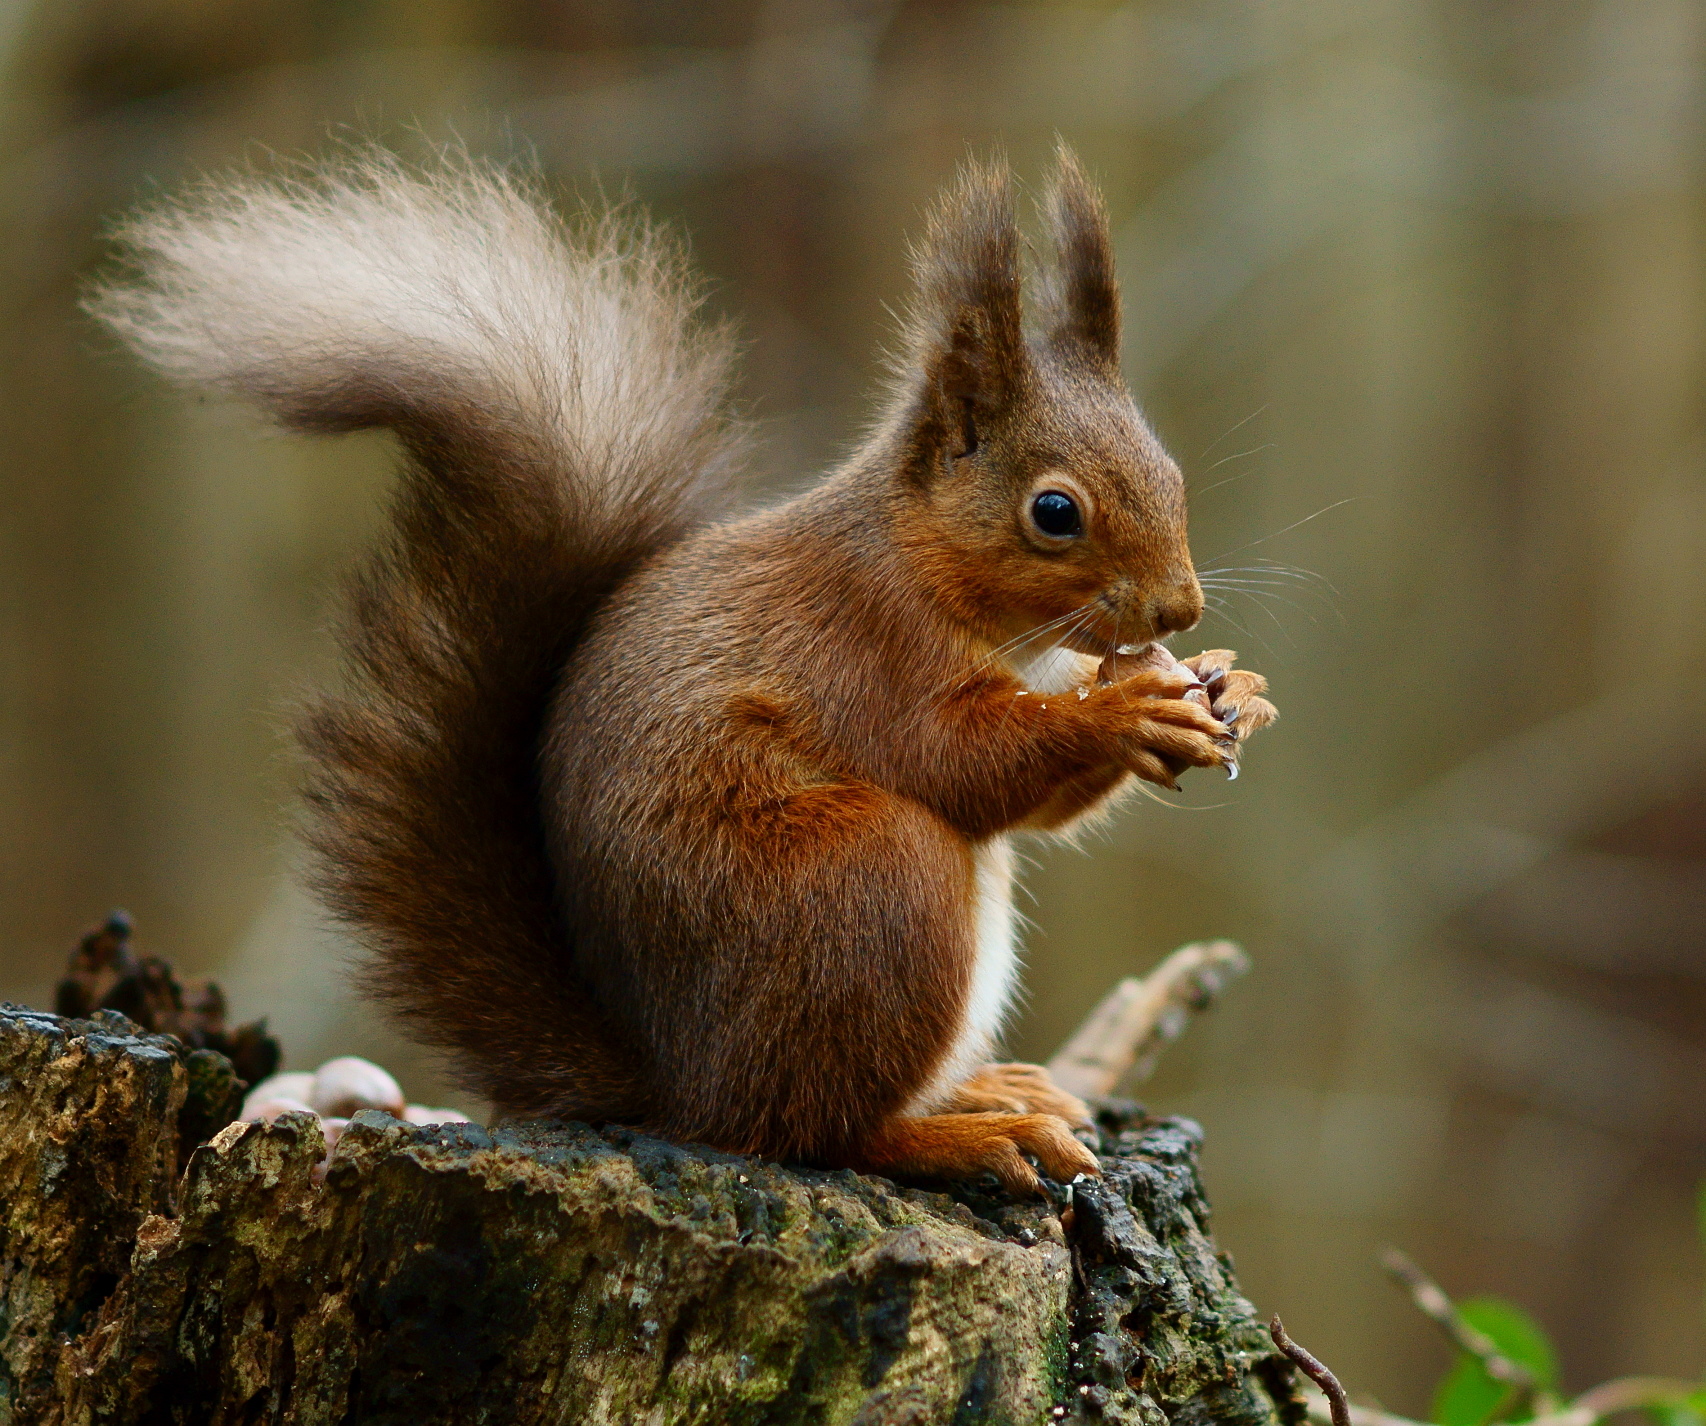 What is the scientific name of the red squirrel?